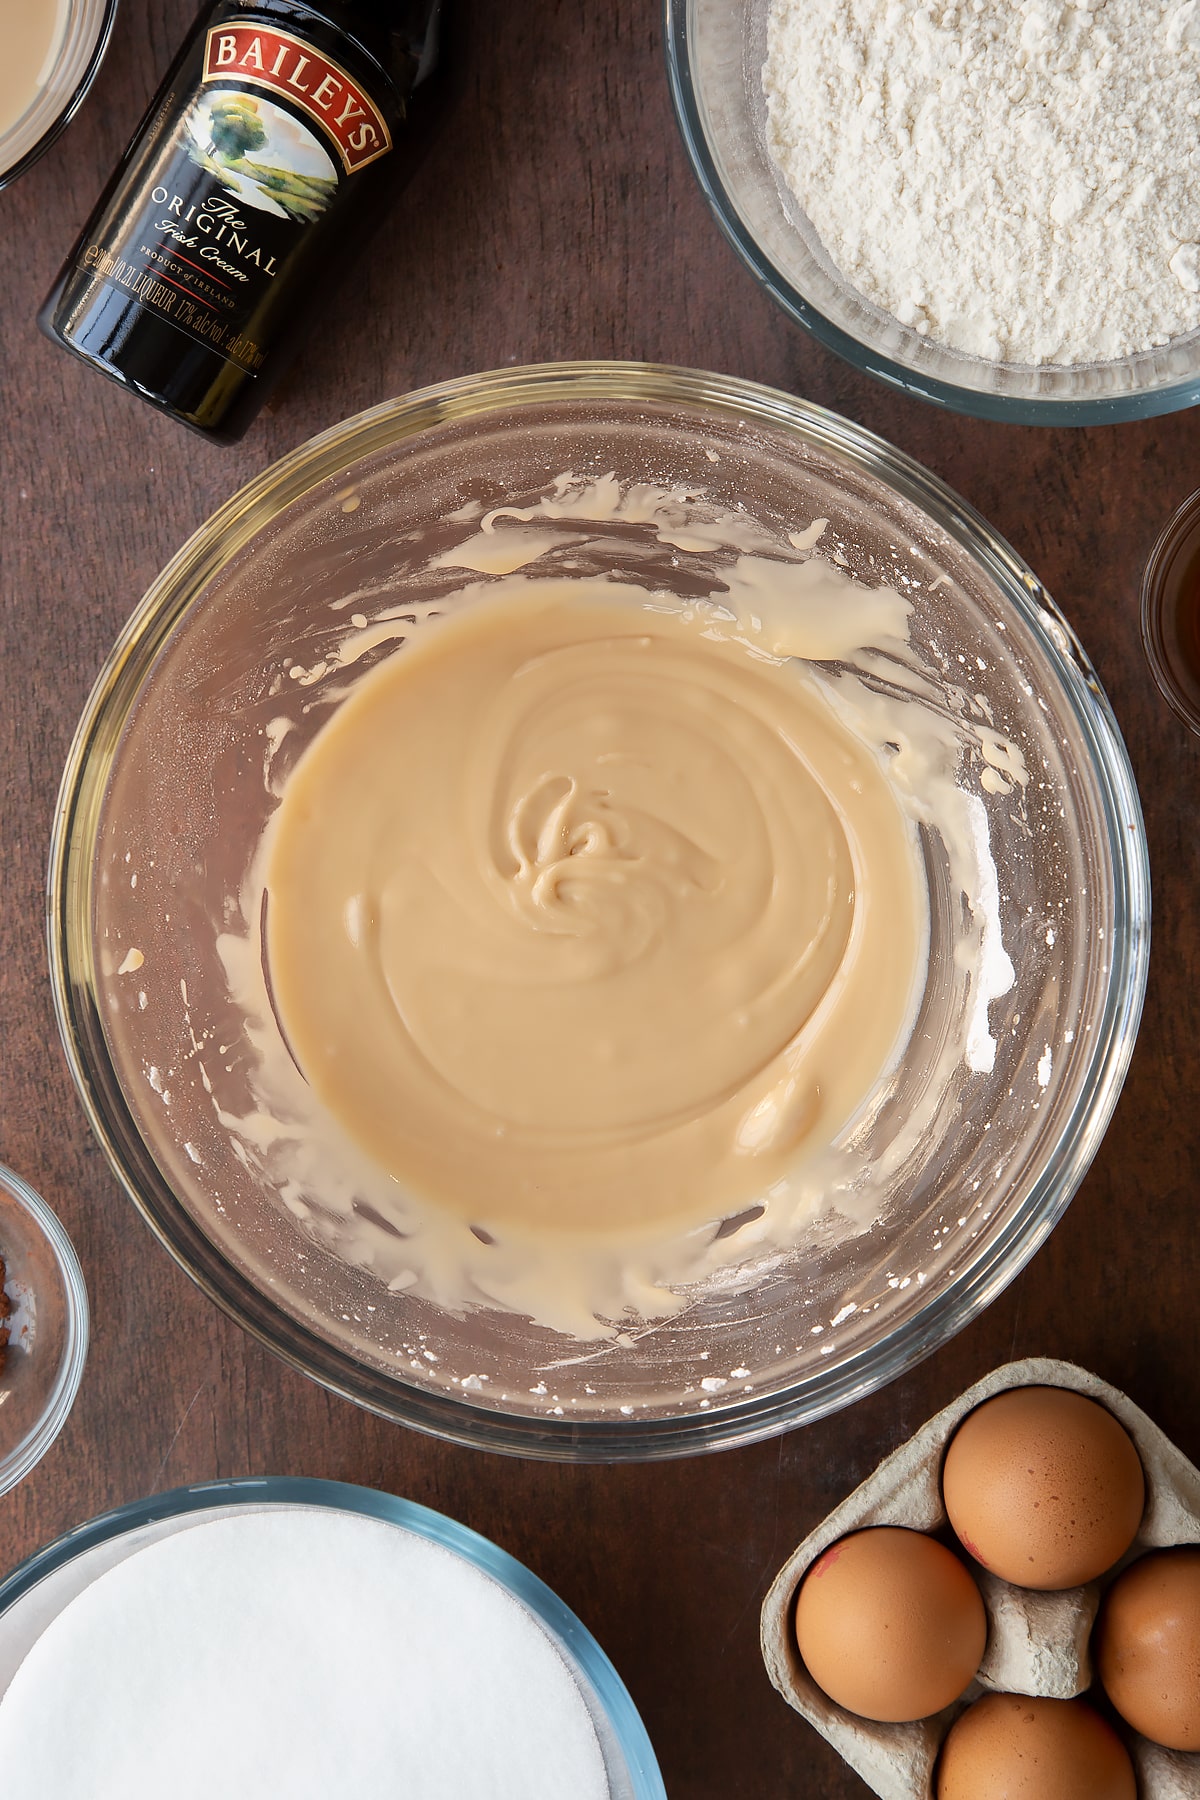 Baileys icing in a bowl. Ingredients to make Baileys brownies surround the bowl.